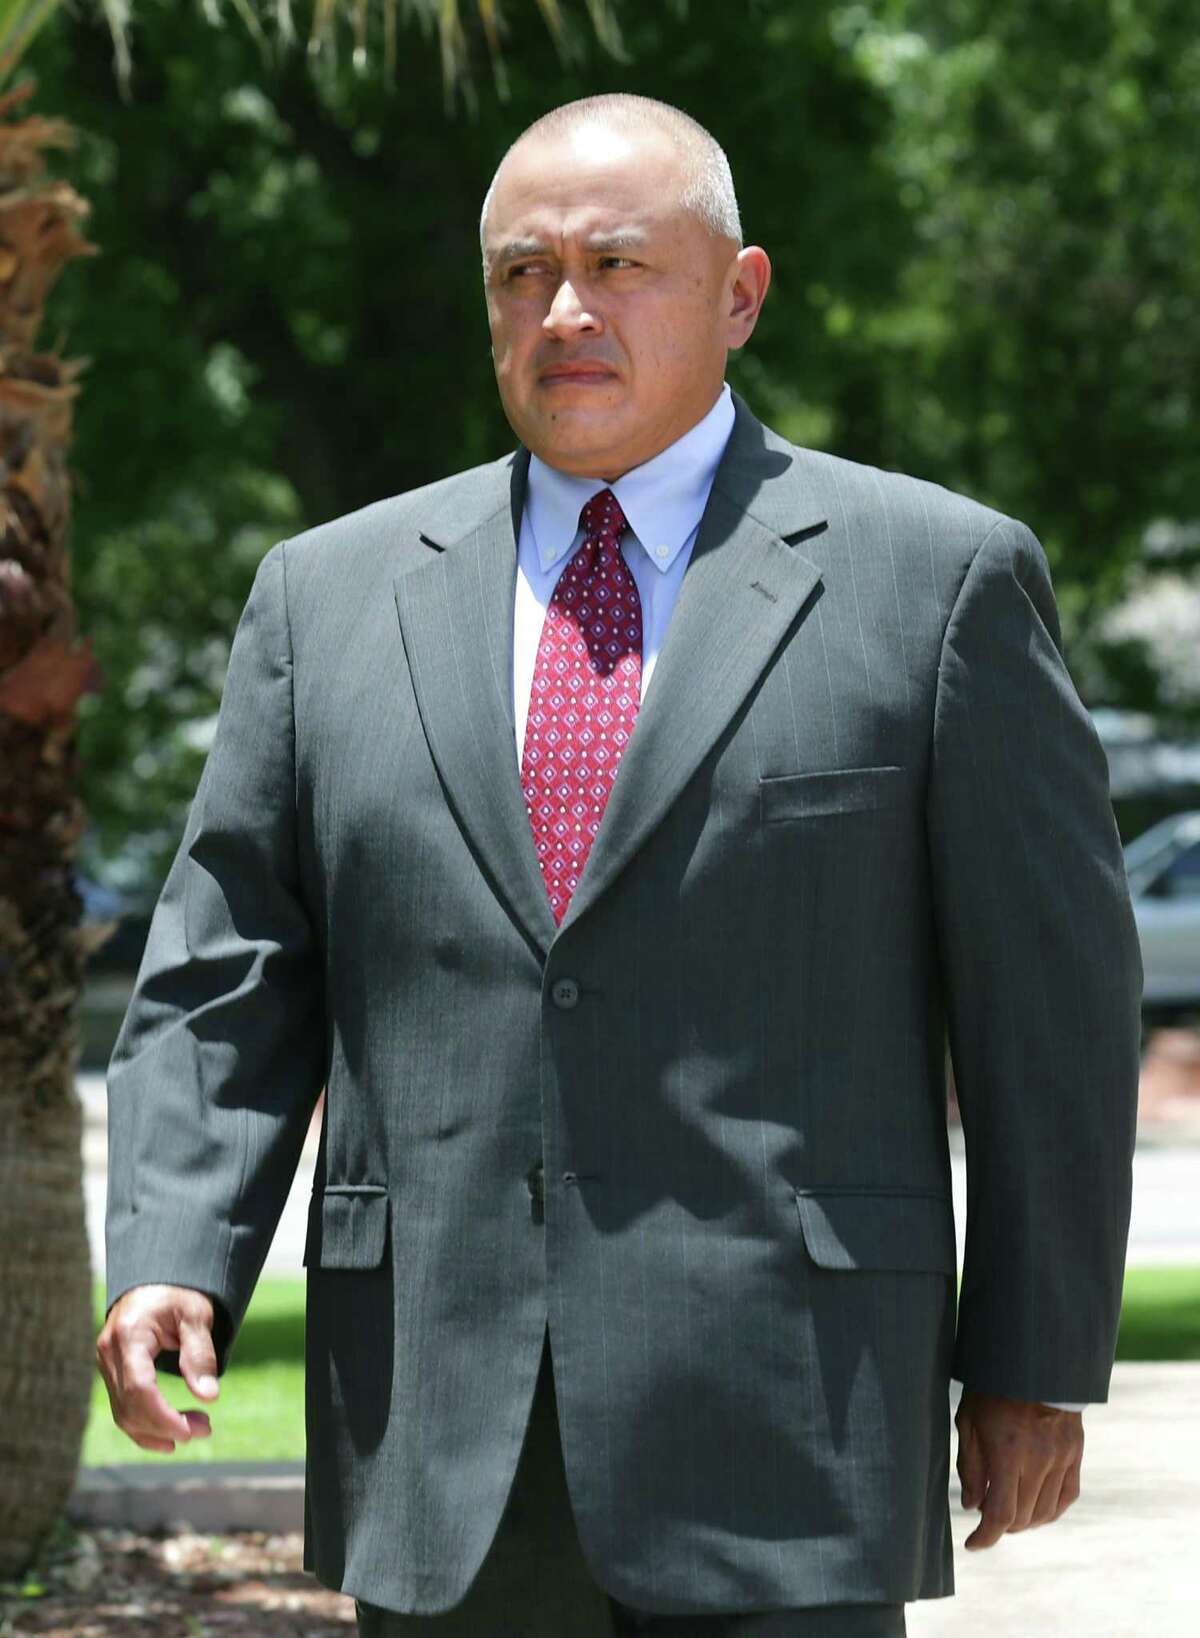 Jimmy Galindo, former Reeves County judge, pleaded guilty to conspiracy to commit bribery. He is expected to testify in Vernon C. Farthing III’s criminal trial.